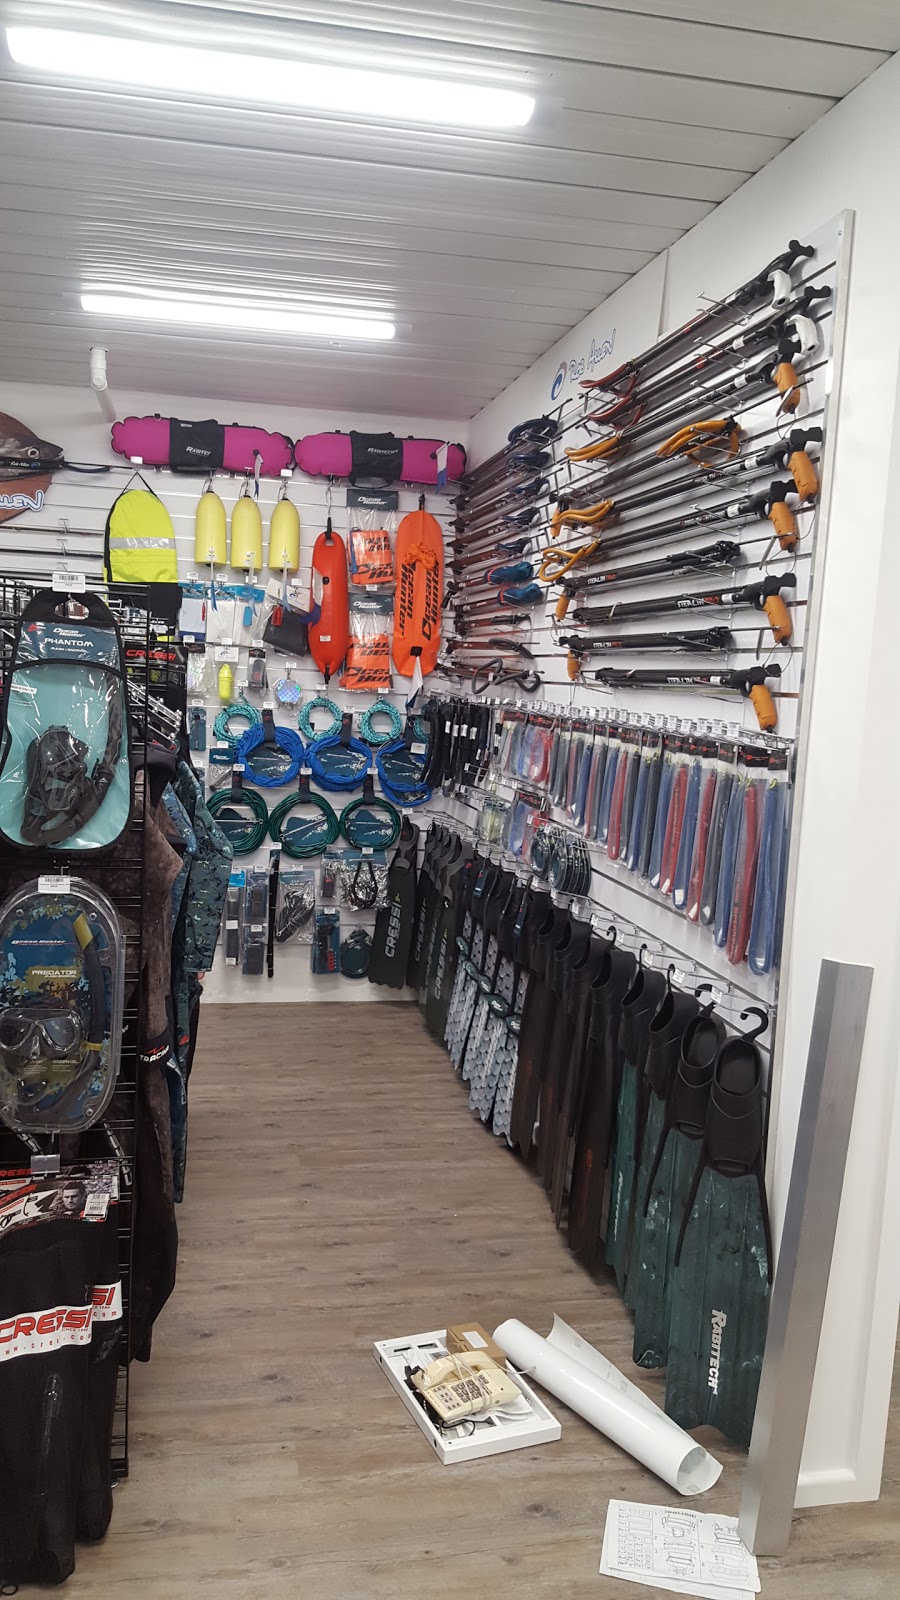 Outdoor Adventure | store | 100 Gregory St, South West Rocks NSW 2431, Australia | 0265665555 OR +61 2 6566 5555